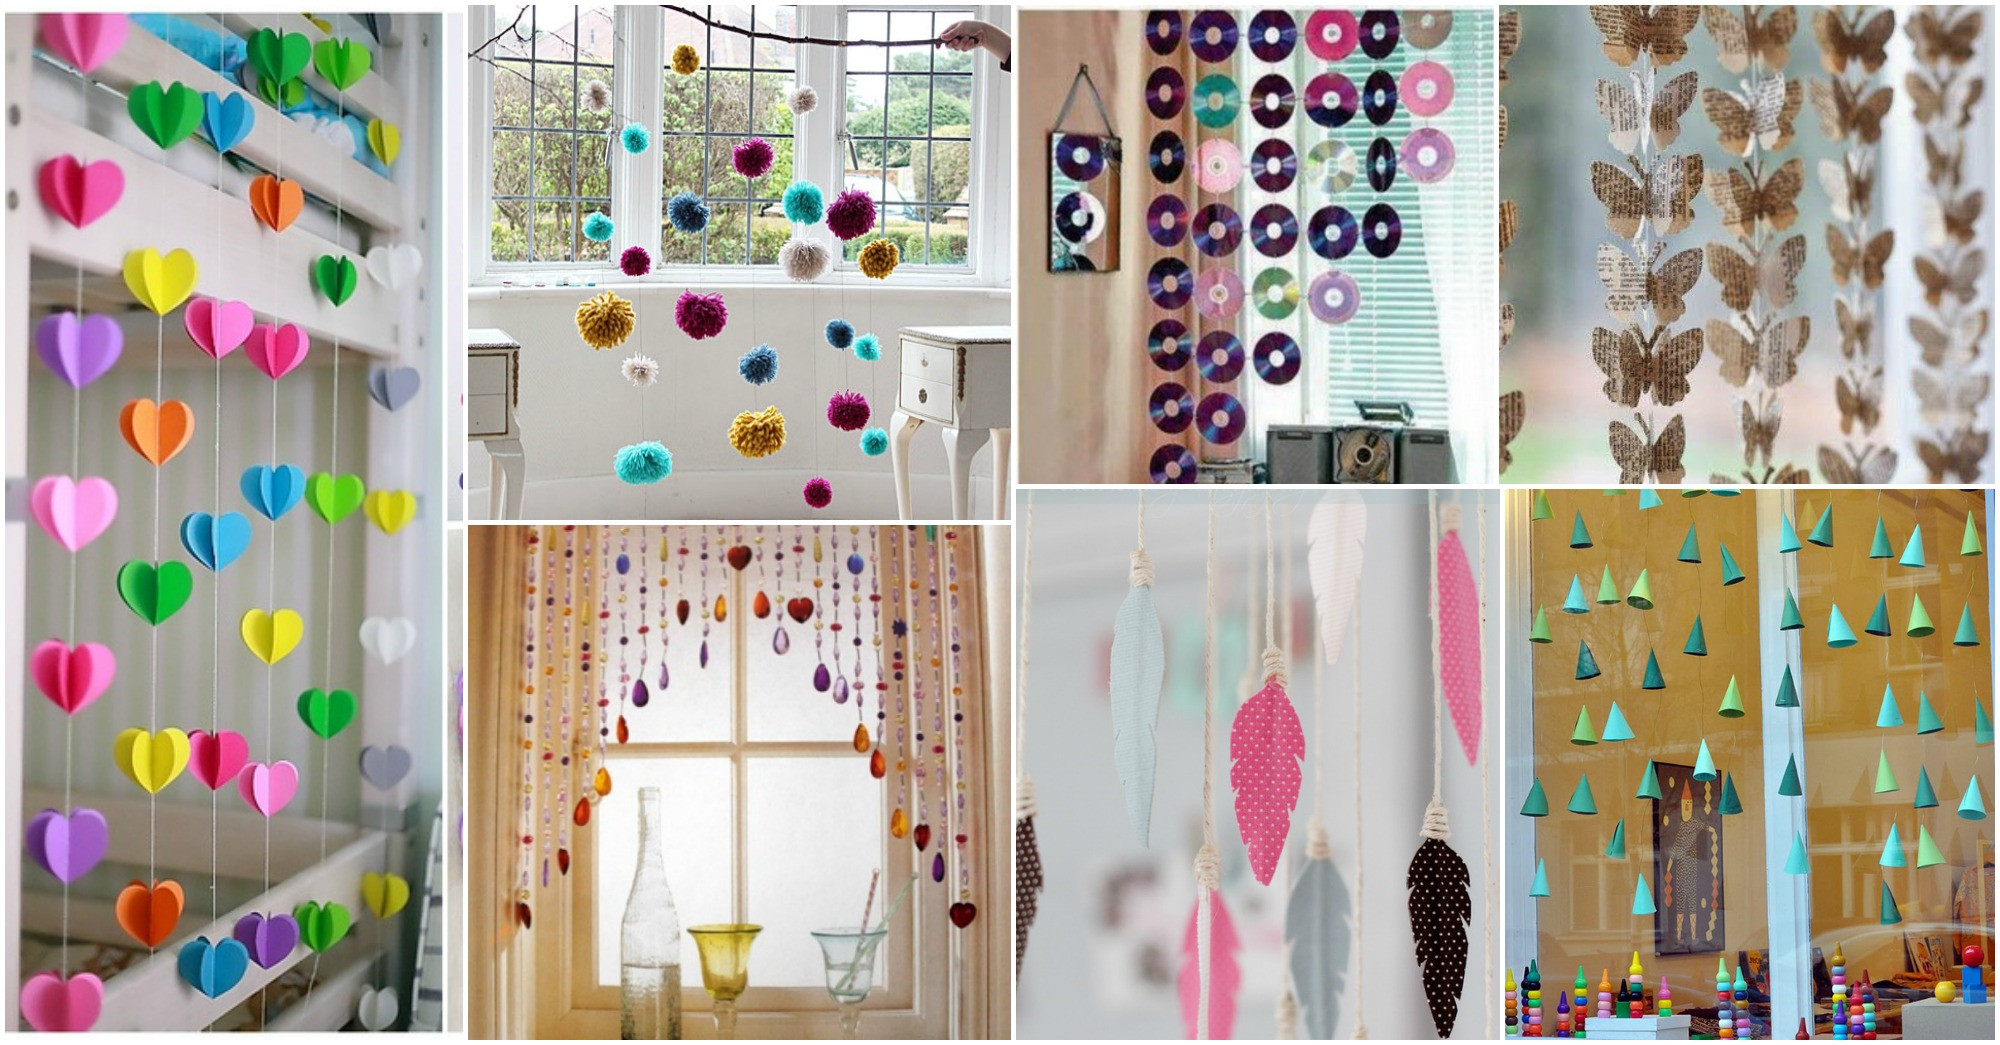 DIY Hanging Decorations
 DIY Hanging Window Decorations That Will Brighten Up Your Day